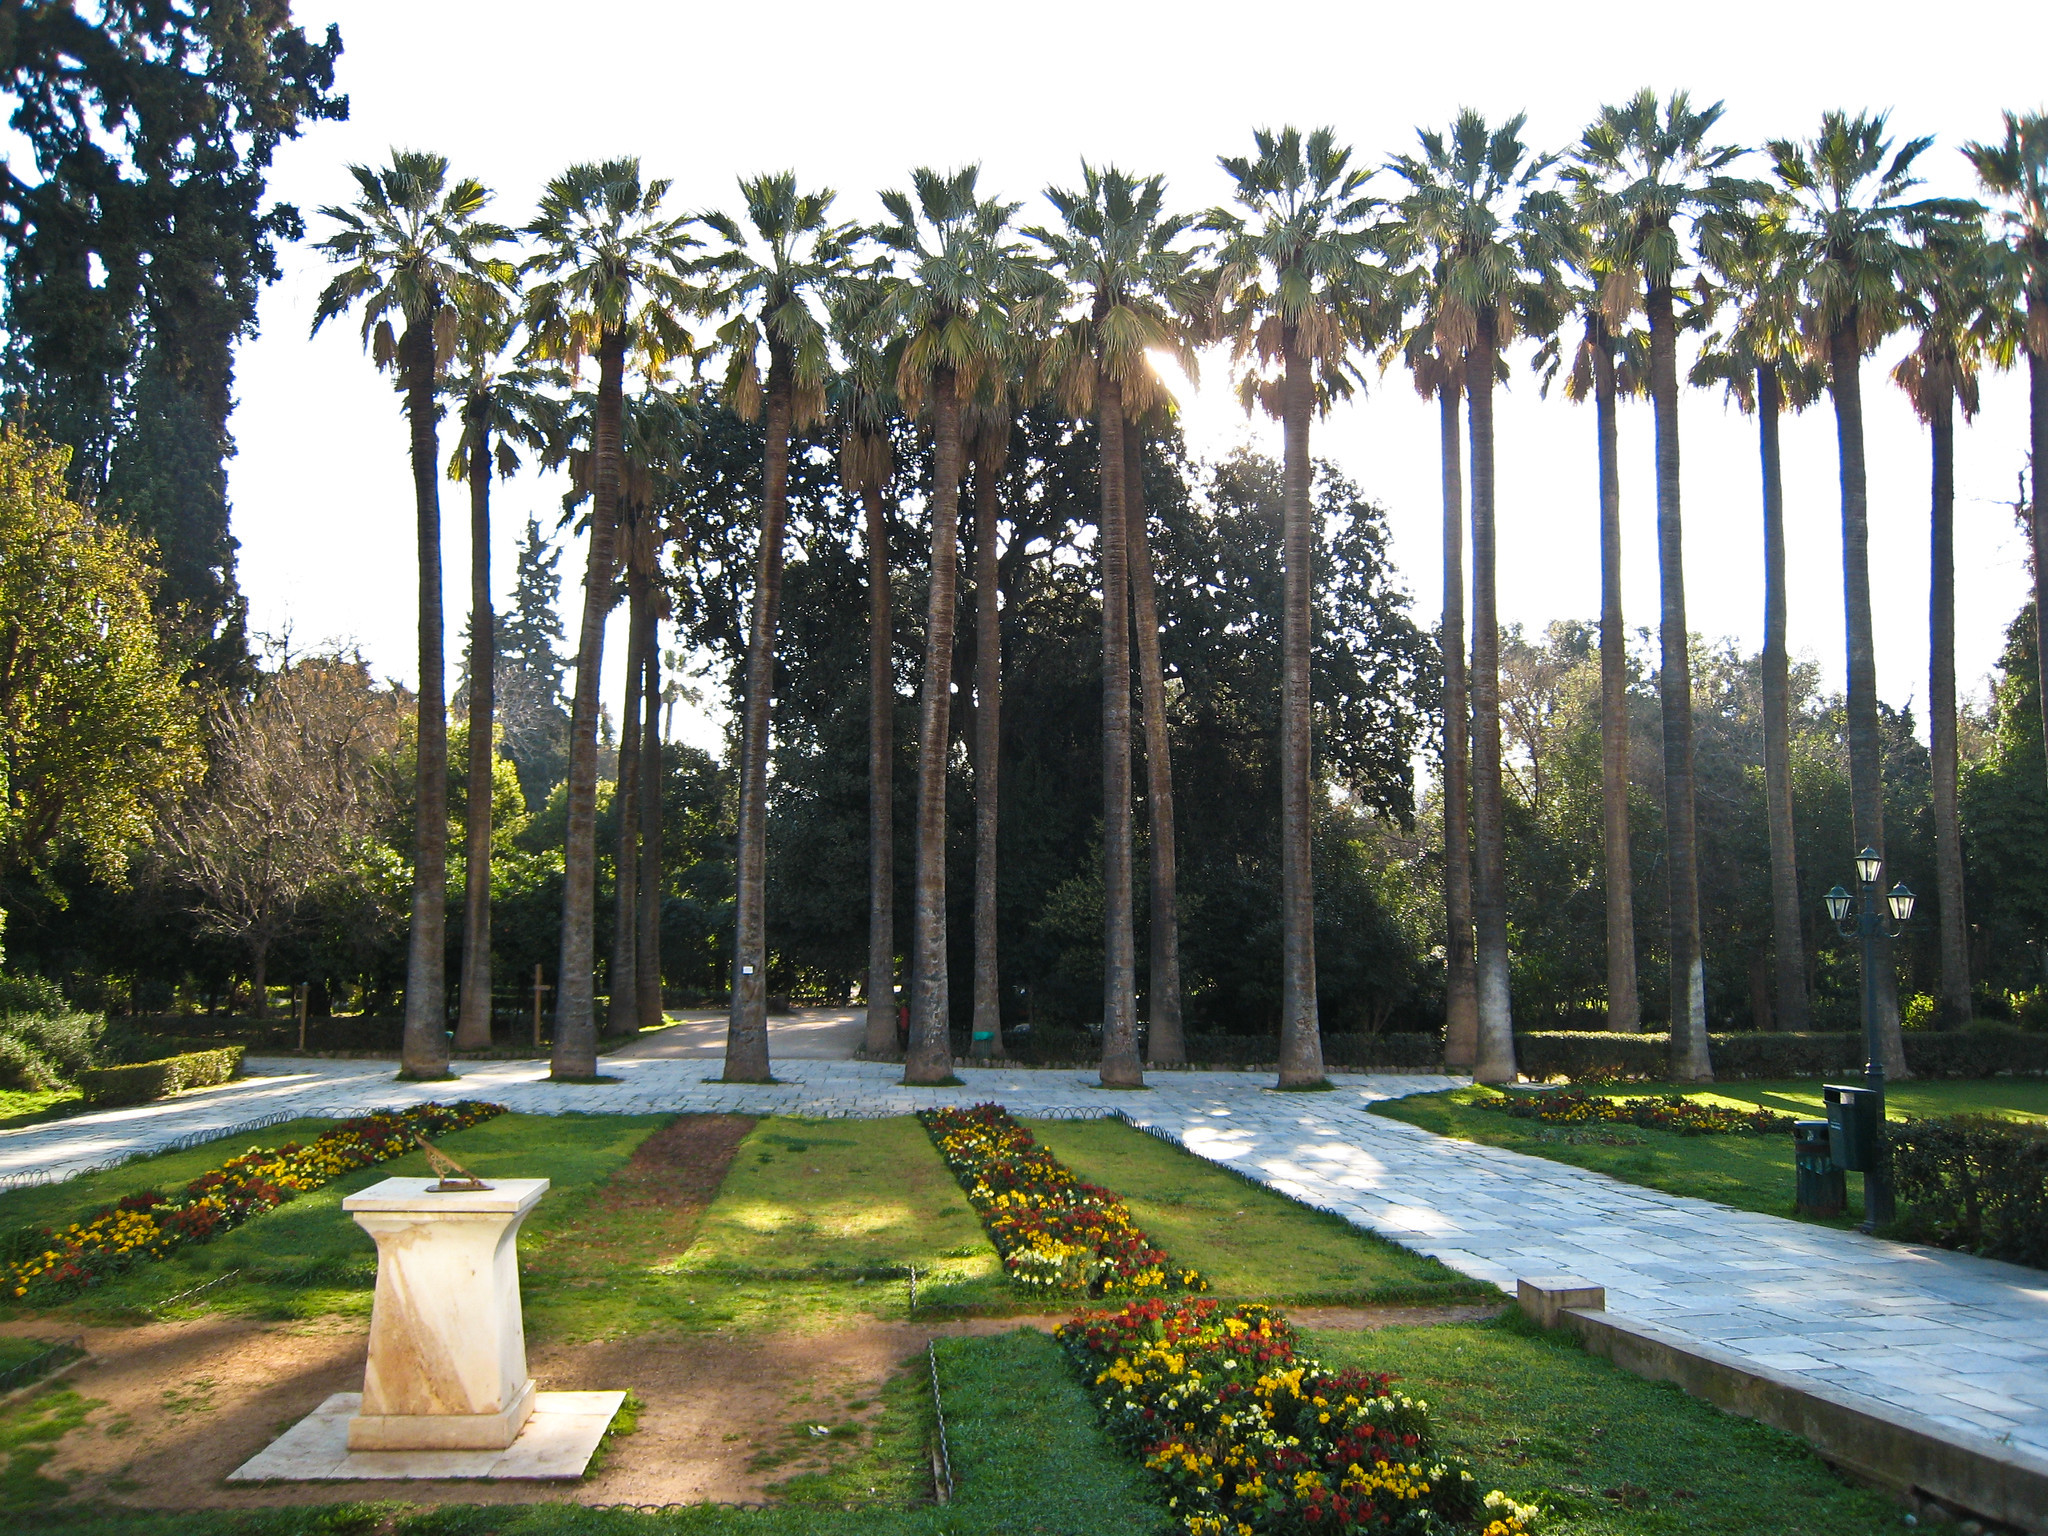 Palms and Sundial in the National Garden of Athens by Sharon Mollerus